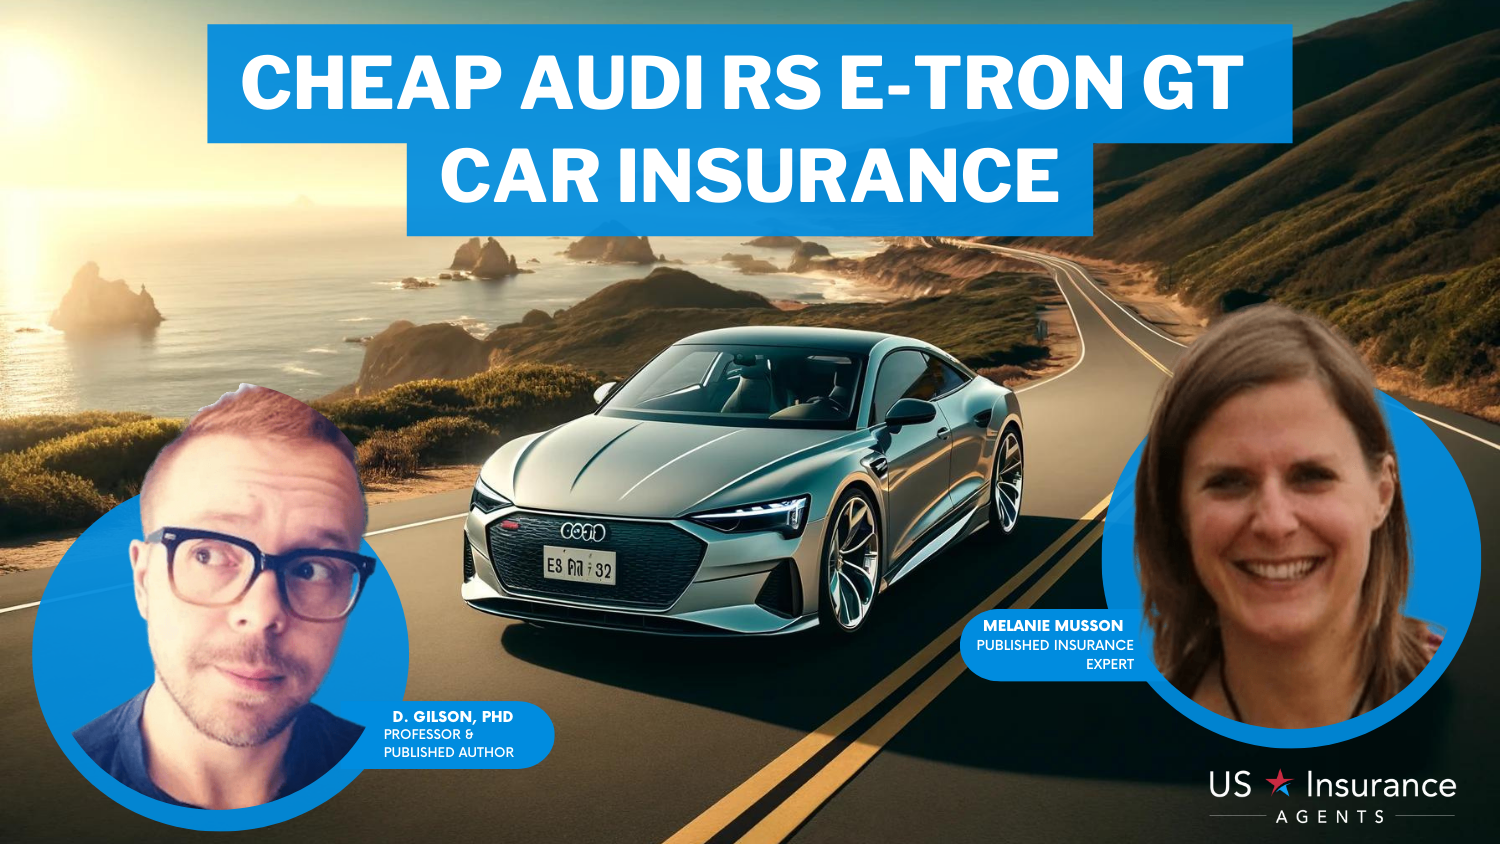 Cheap Audi RS e-tron GT Car Insurance: USAA, State Farm, and Travelers